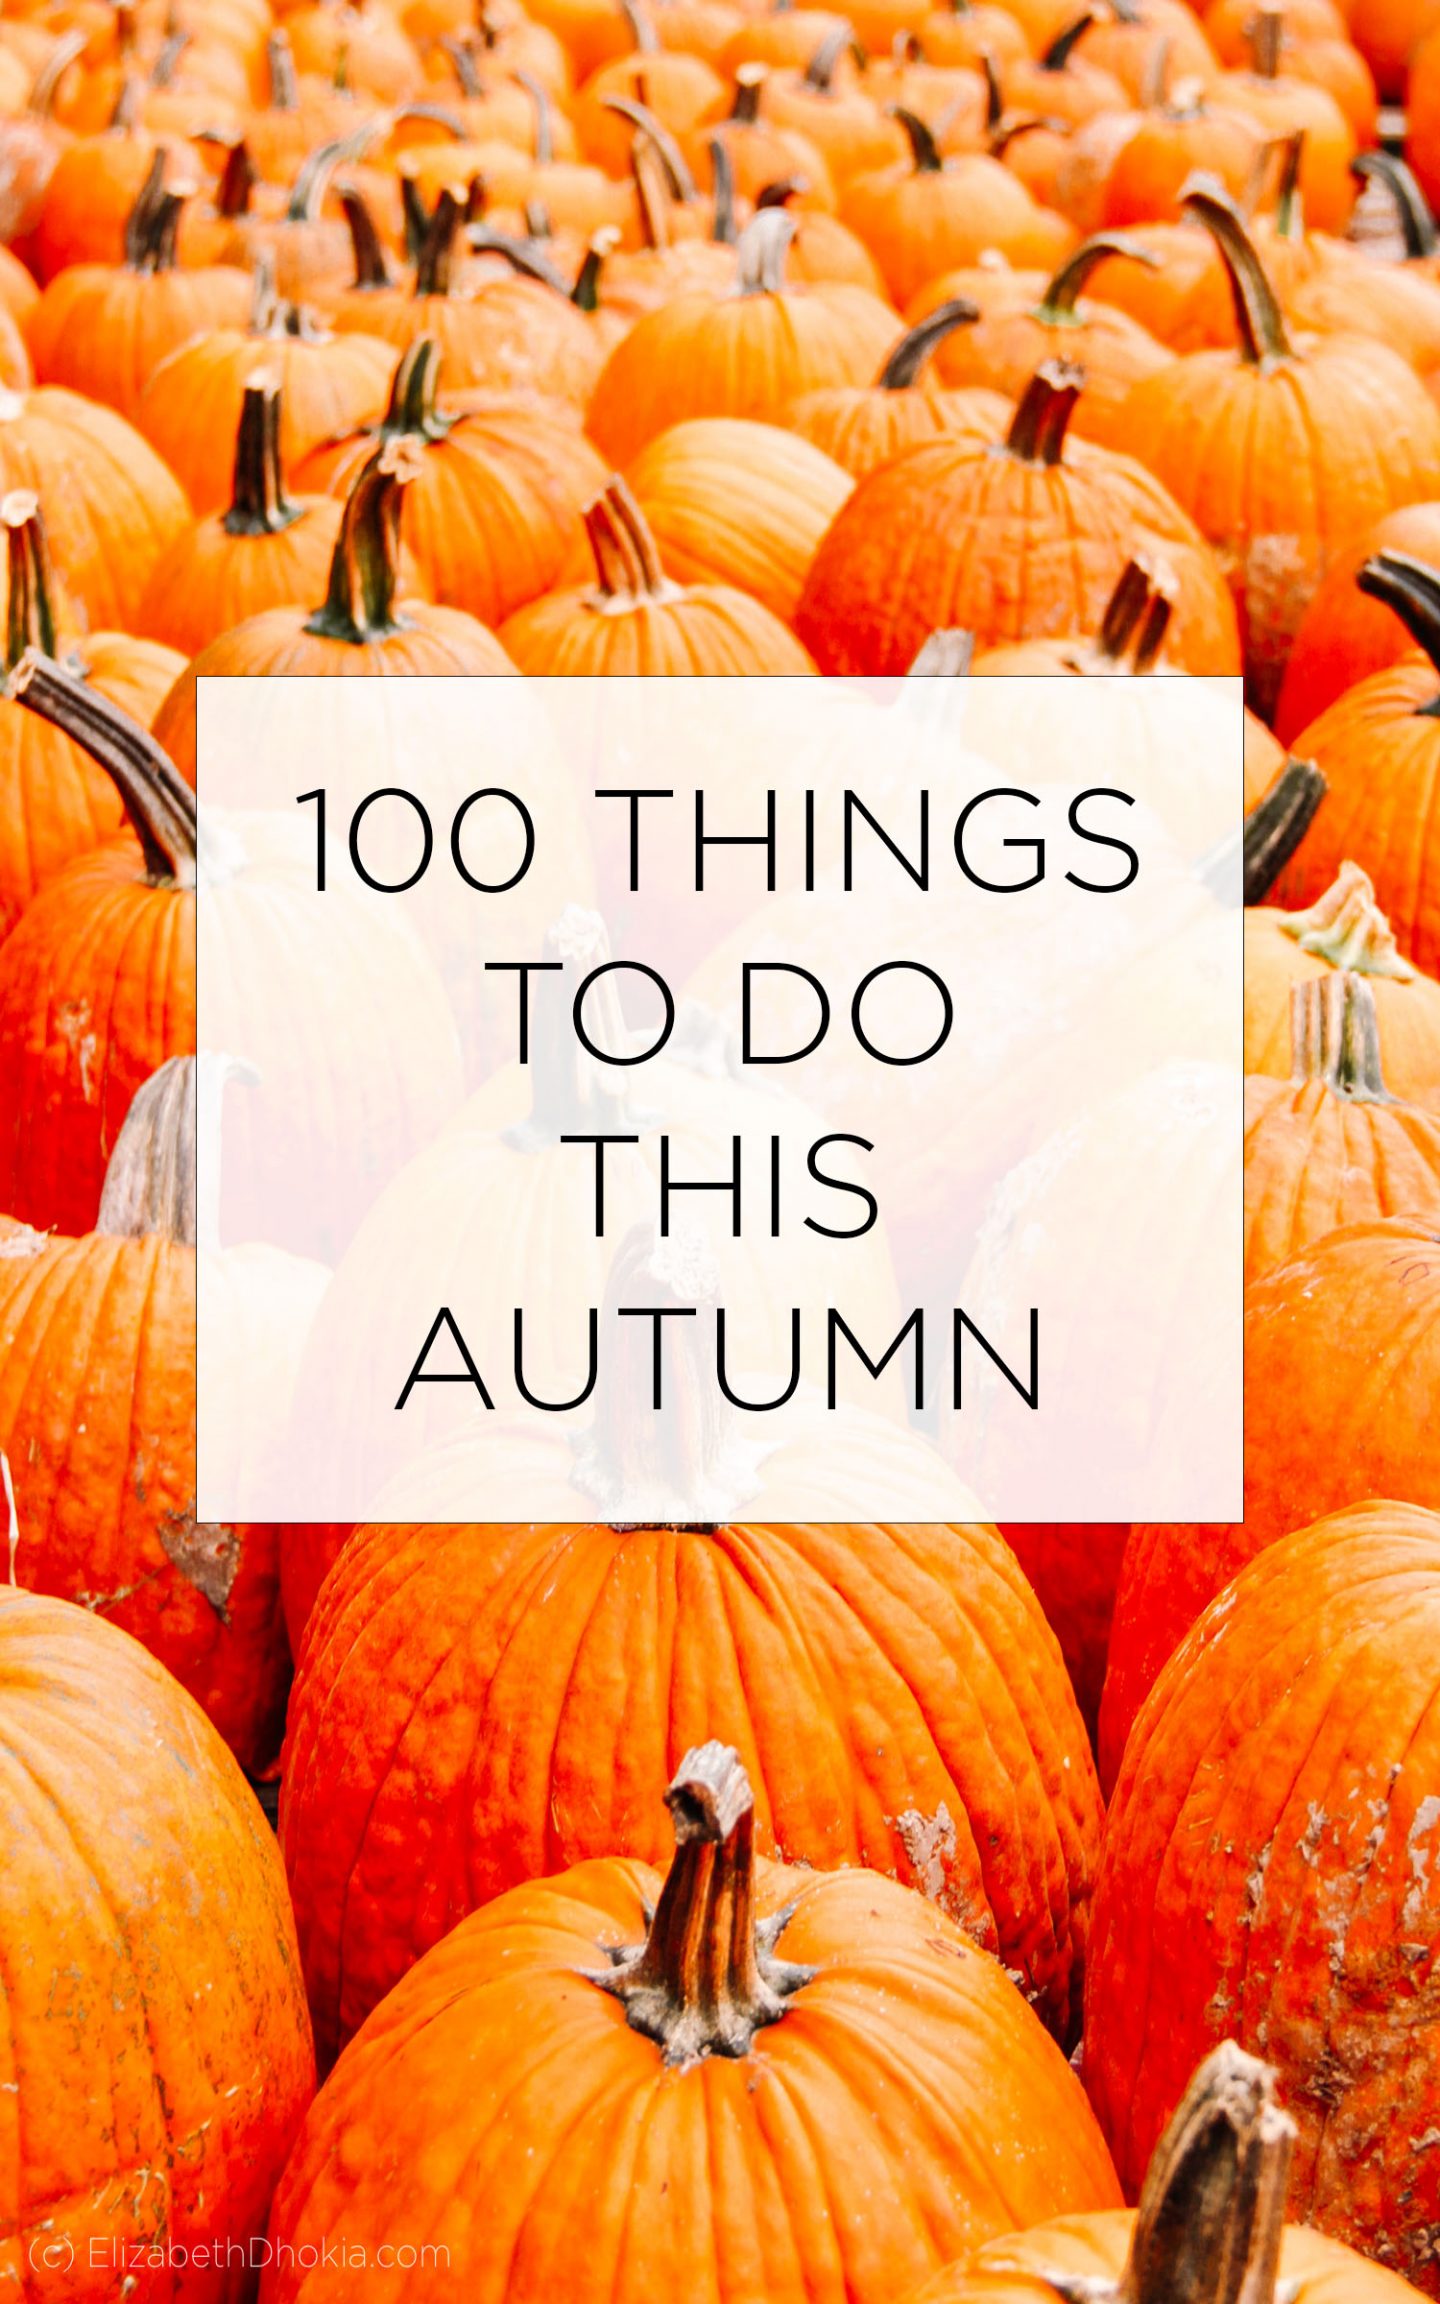 100 Things To Do This Autumn List